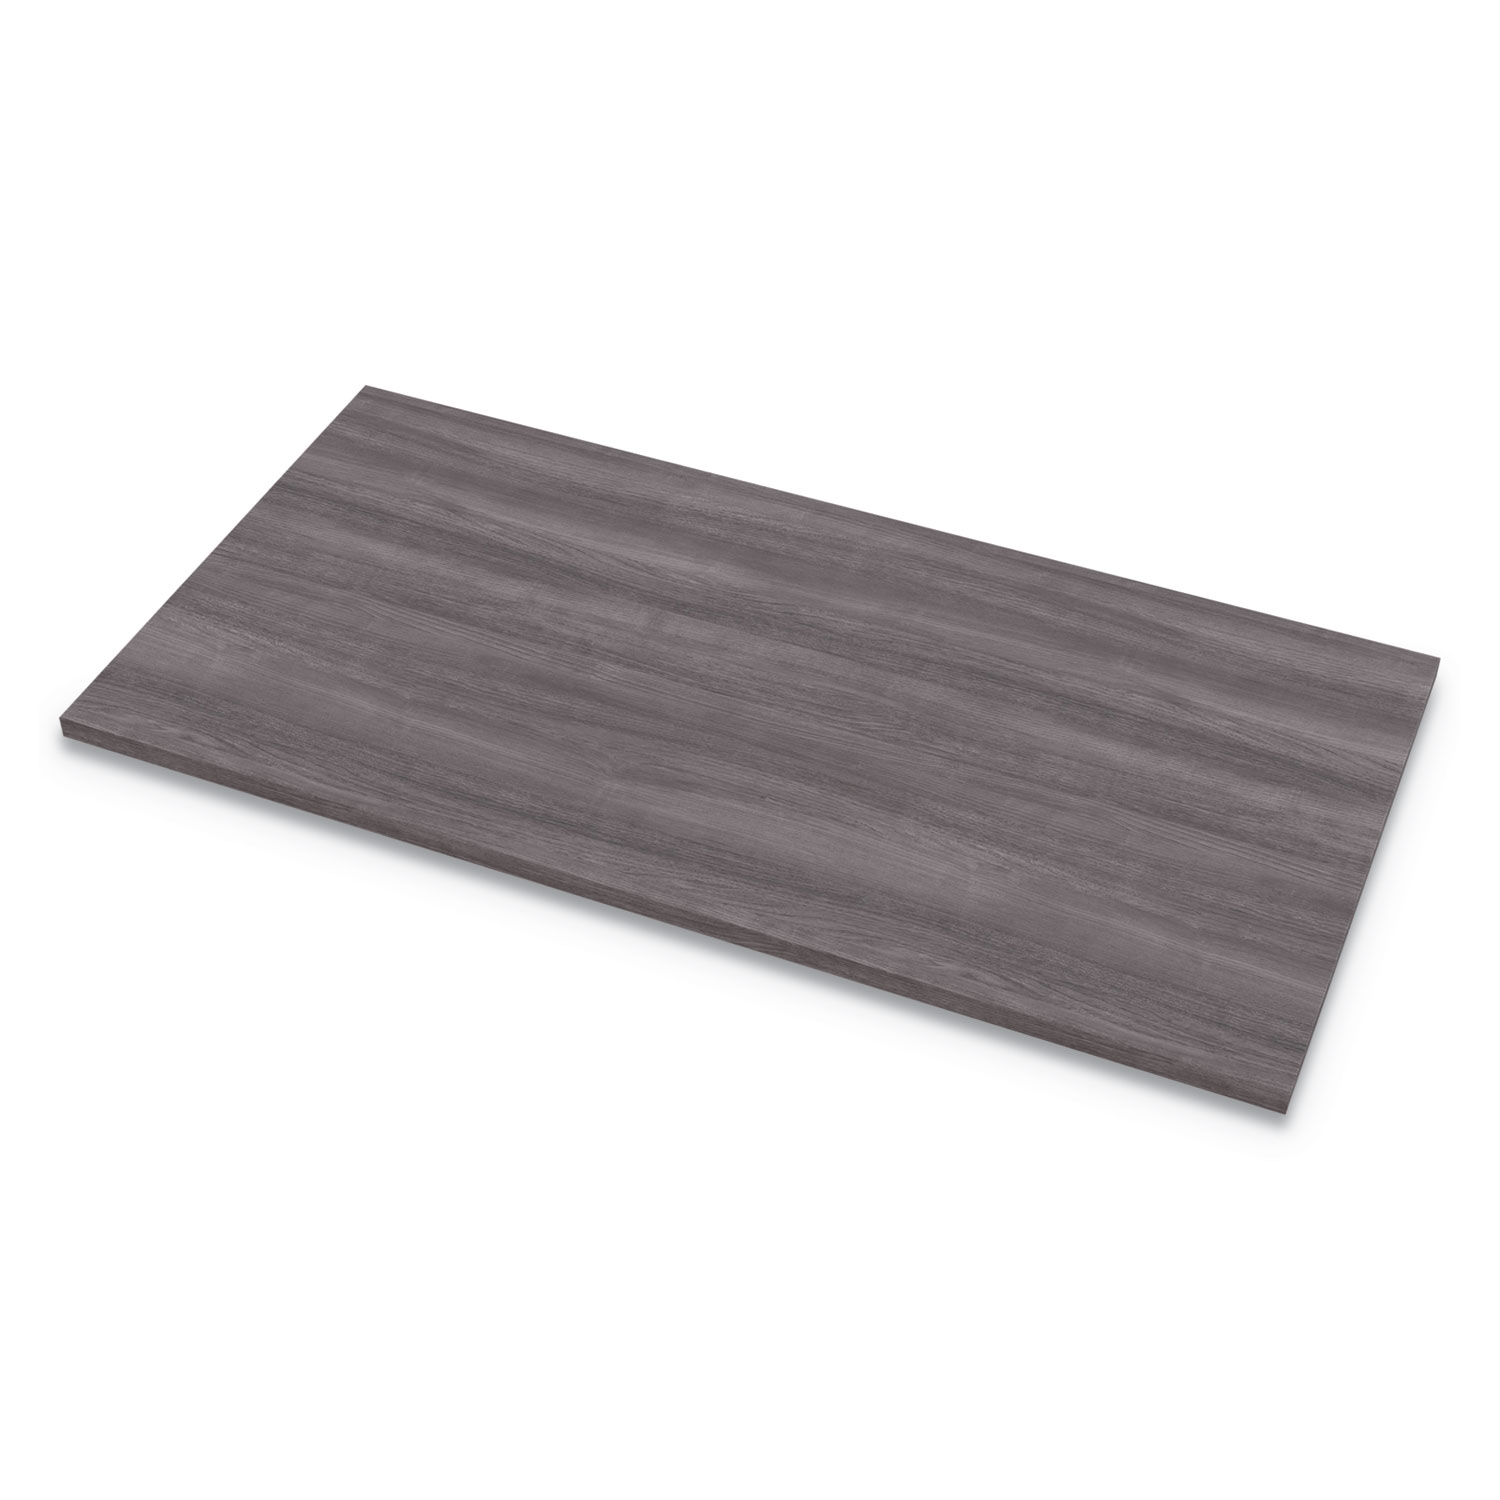 Levado Laminate Table Top (Top Only), 48w x 24d, Gray Ash